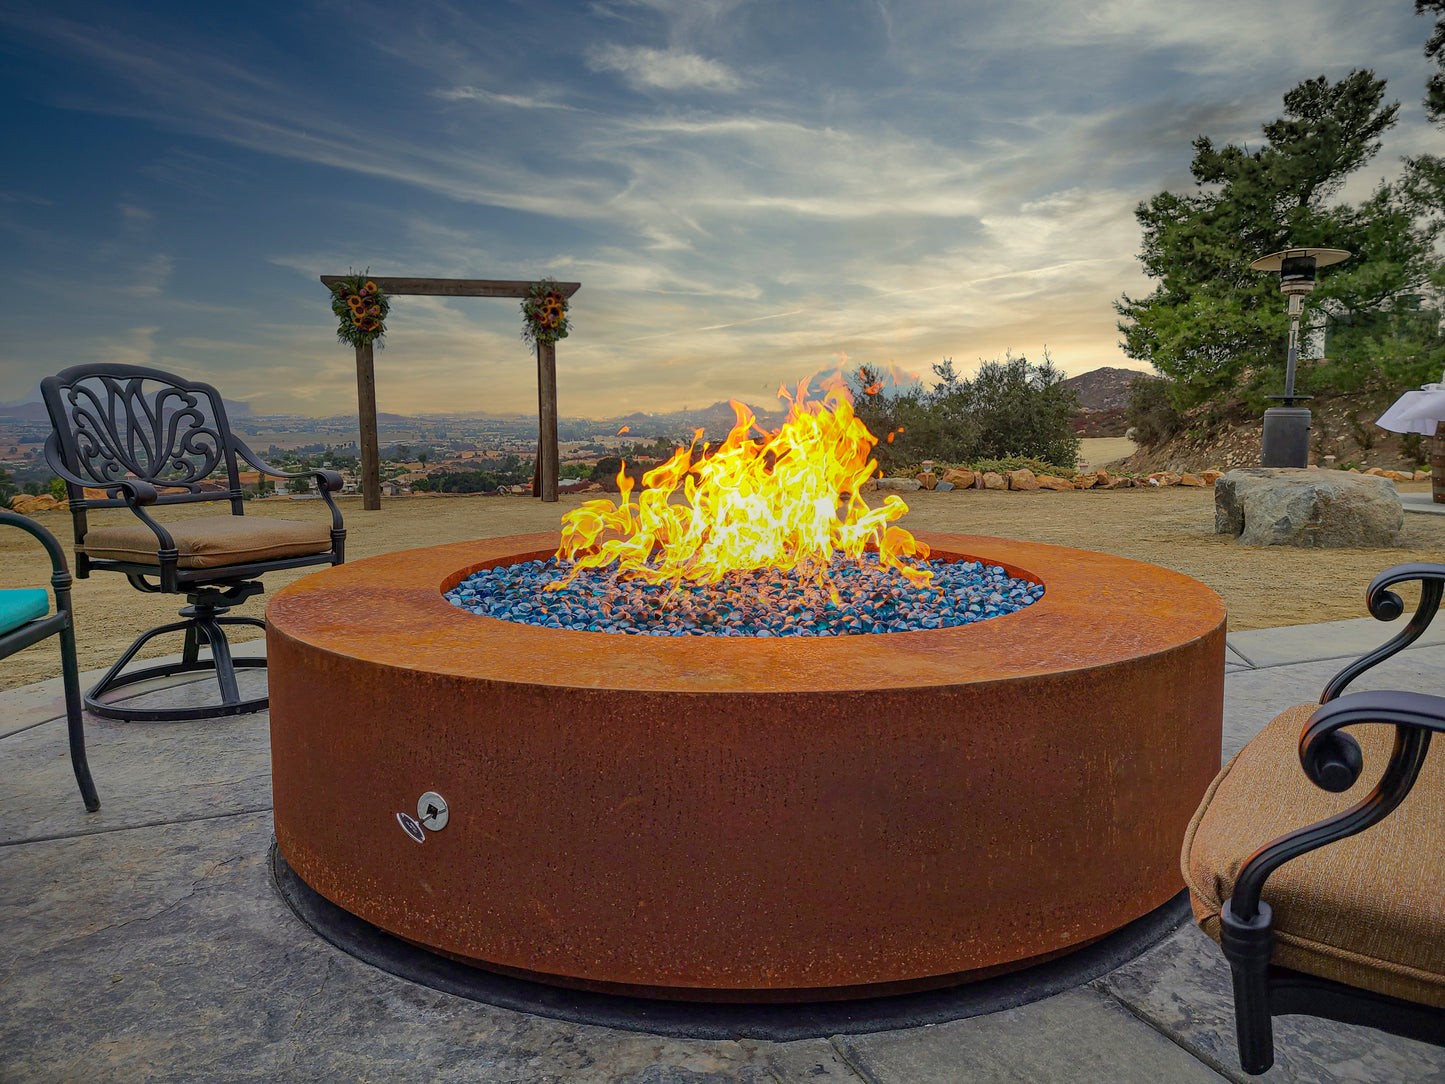 The Outdoor Plus Unity Steel Fire Pit - 24" Tall - Free Cover